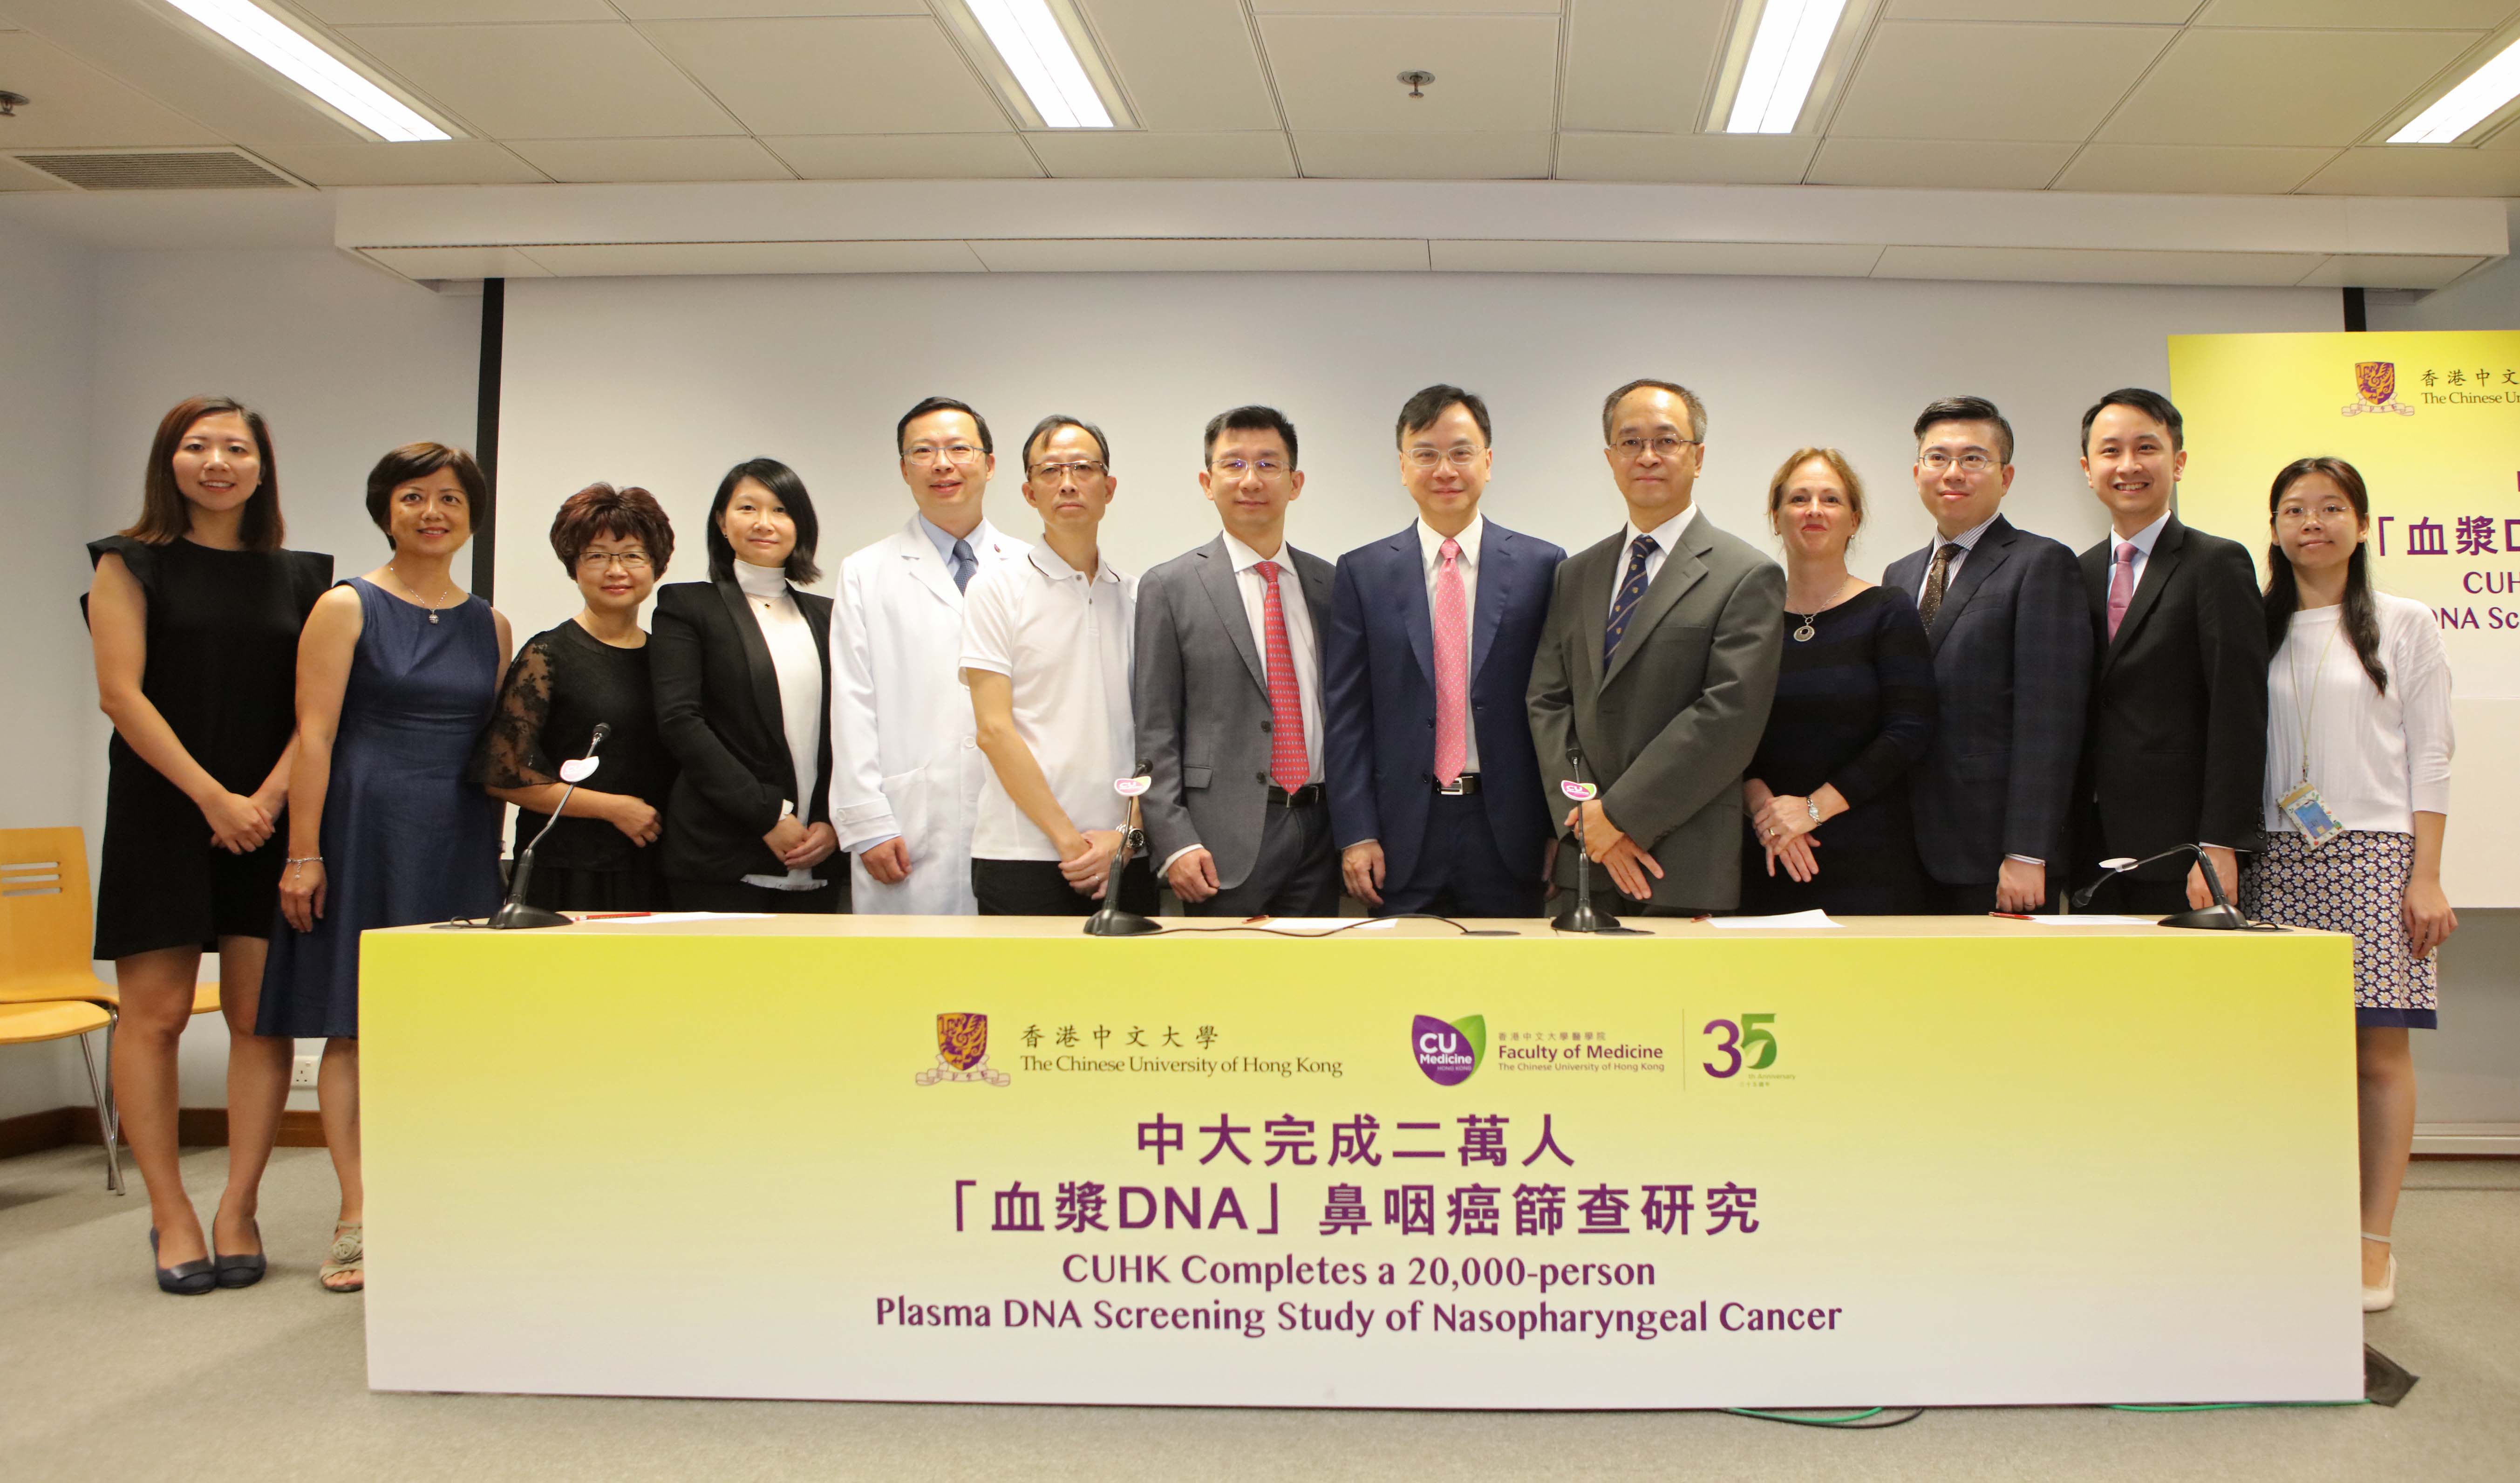 Group photo of the research team for the Plasma DNA Screening Study of Nasopharyngeal Cancer.